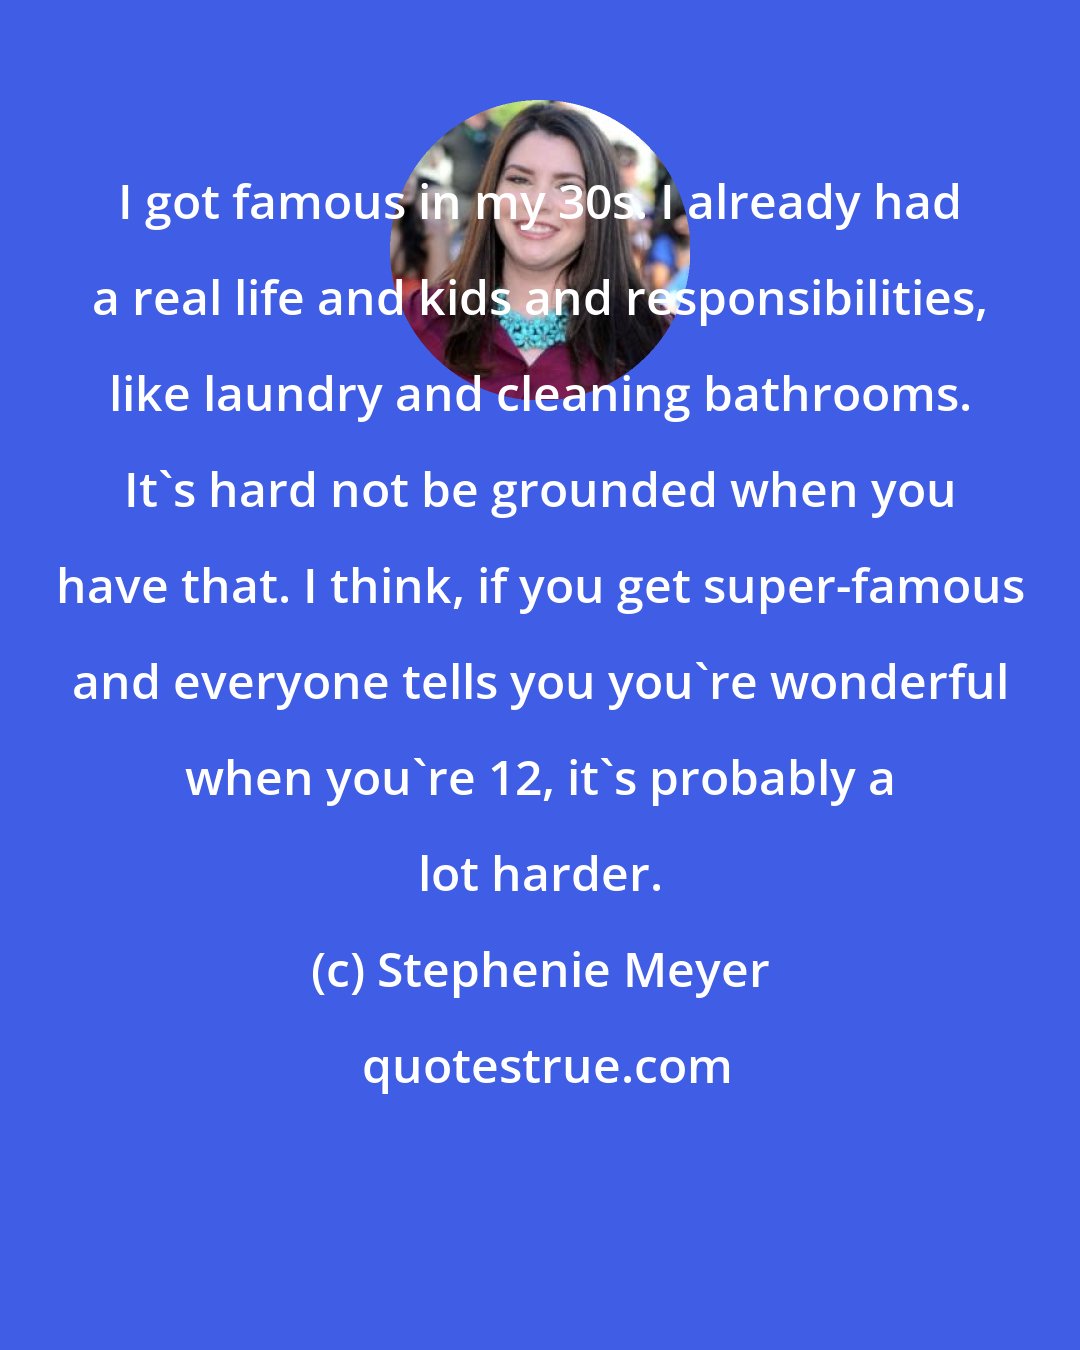 Stephenie Meyer: I got famous in my 30s. I already had a real life and kids and responsibilities, like laundry and cleaning bathrooms. It's hard not be grounded when you have that. I think, if you get super-famous and everyone tells you you're wonderful when you're 12, it's probably a lot harder.